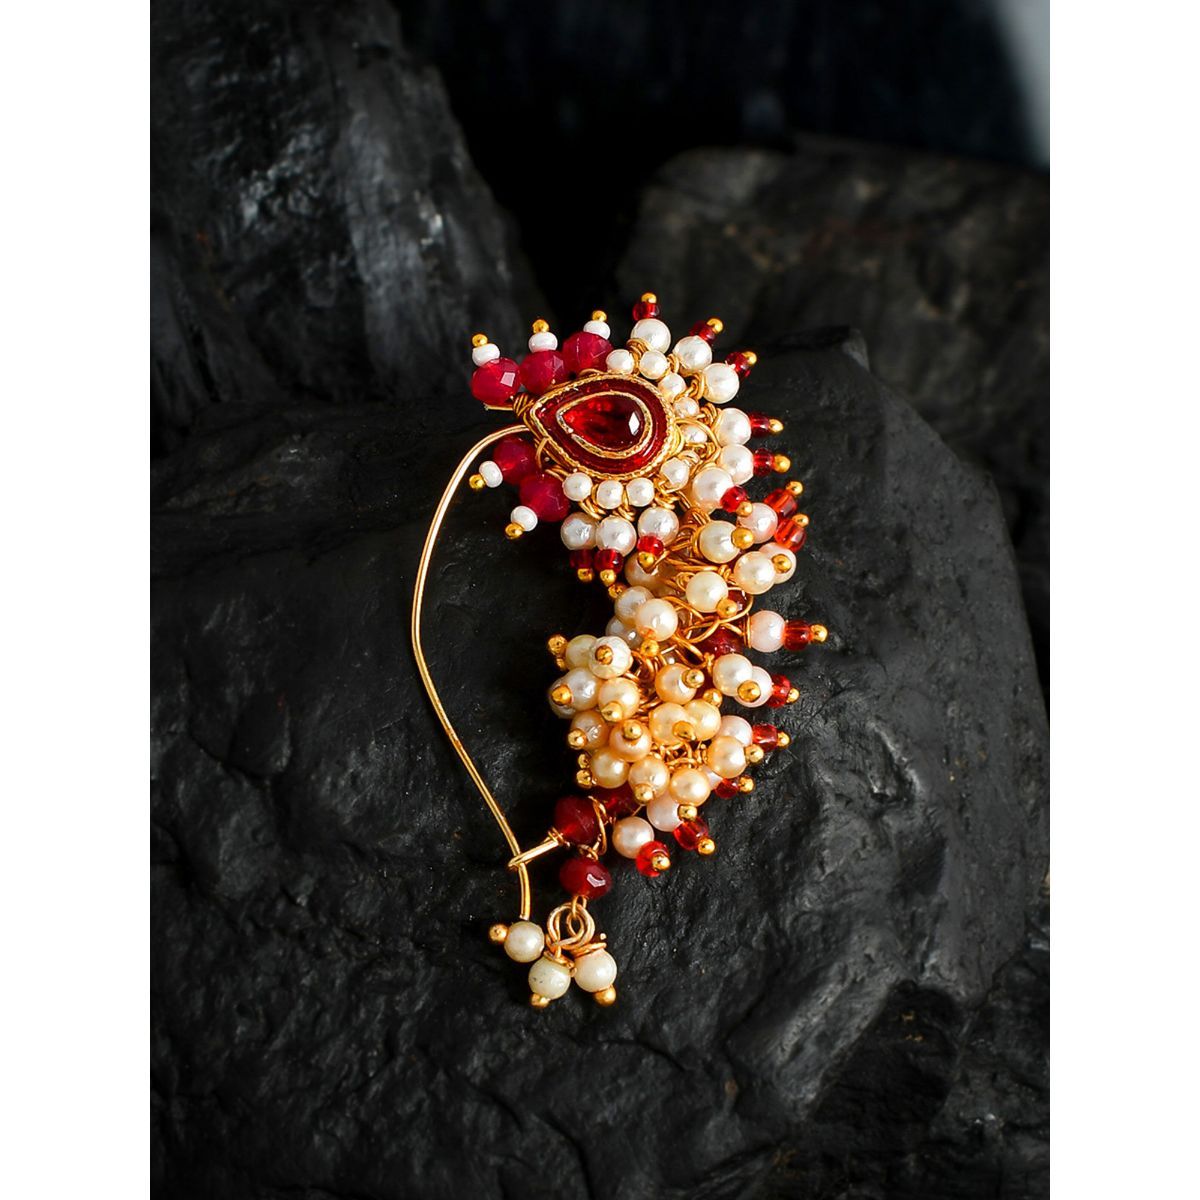 Shop Marathi Nose Ring for Women Online from India's Luxury Designers 2024